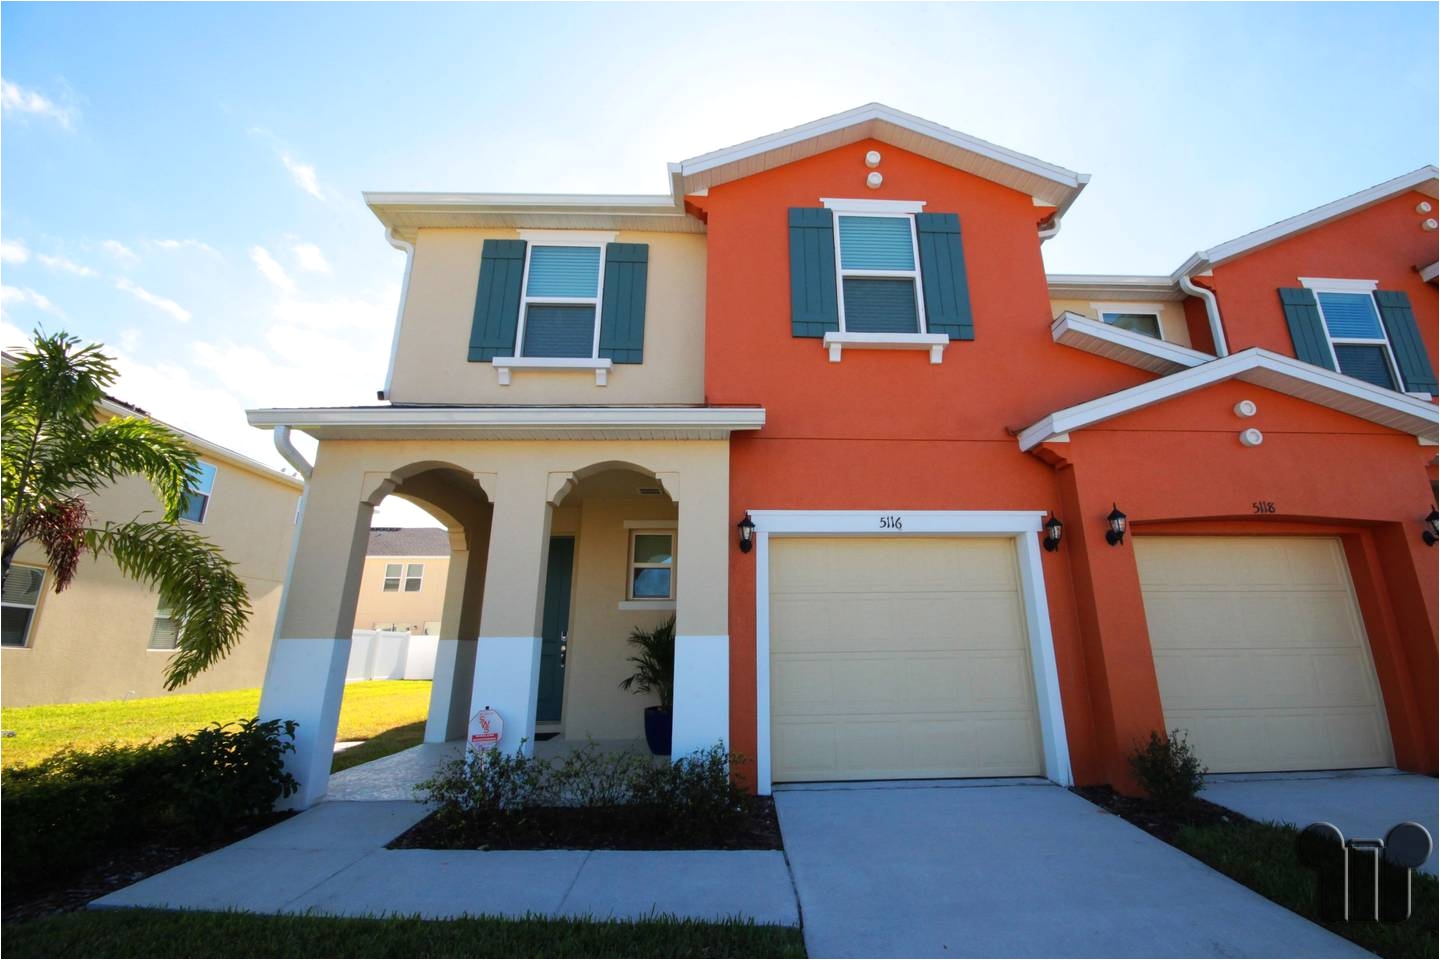 m5116ad townhouse compass bay townhouses for rent in kissimmee florida united states